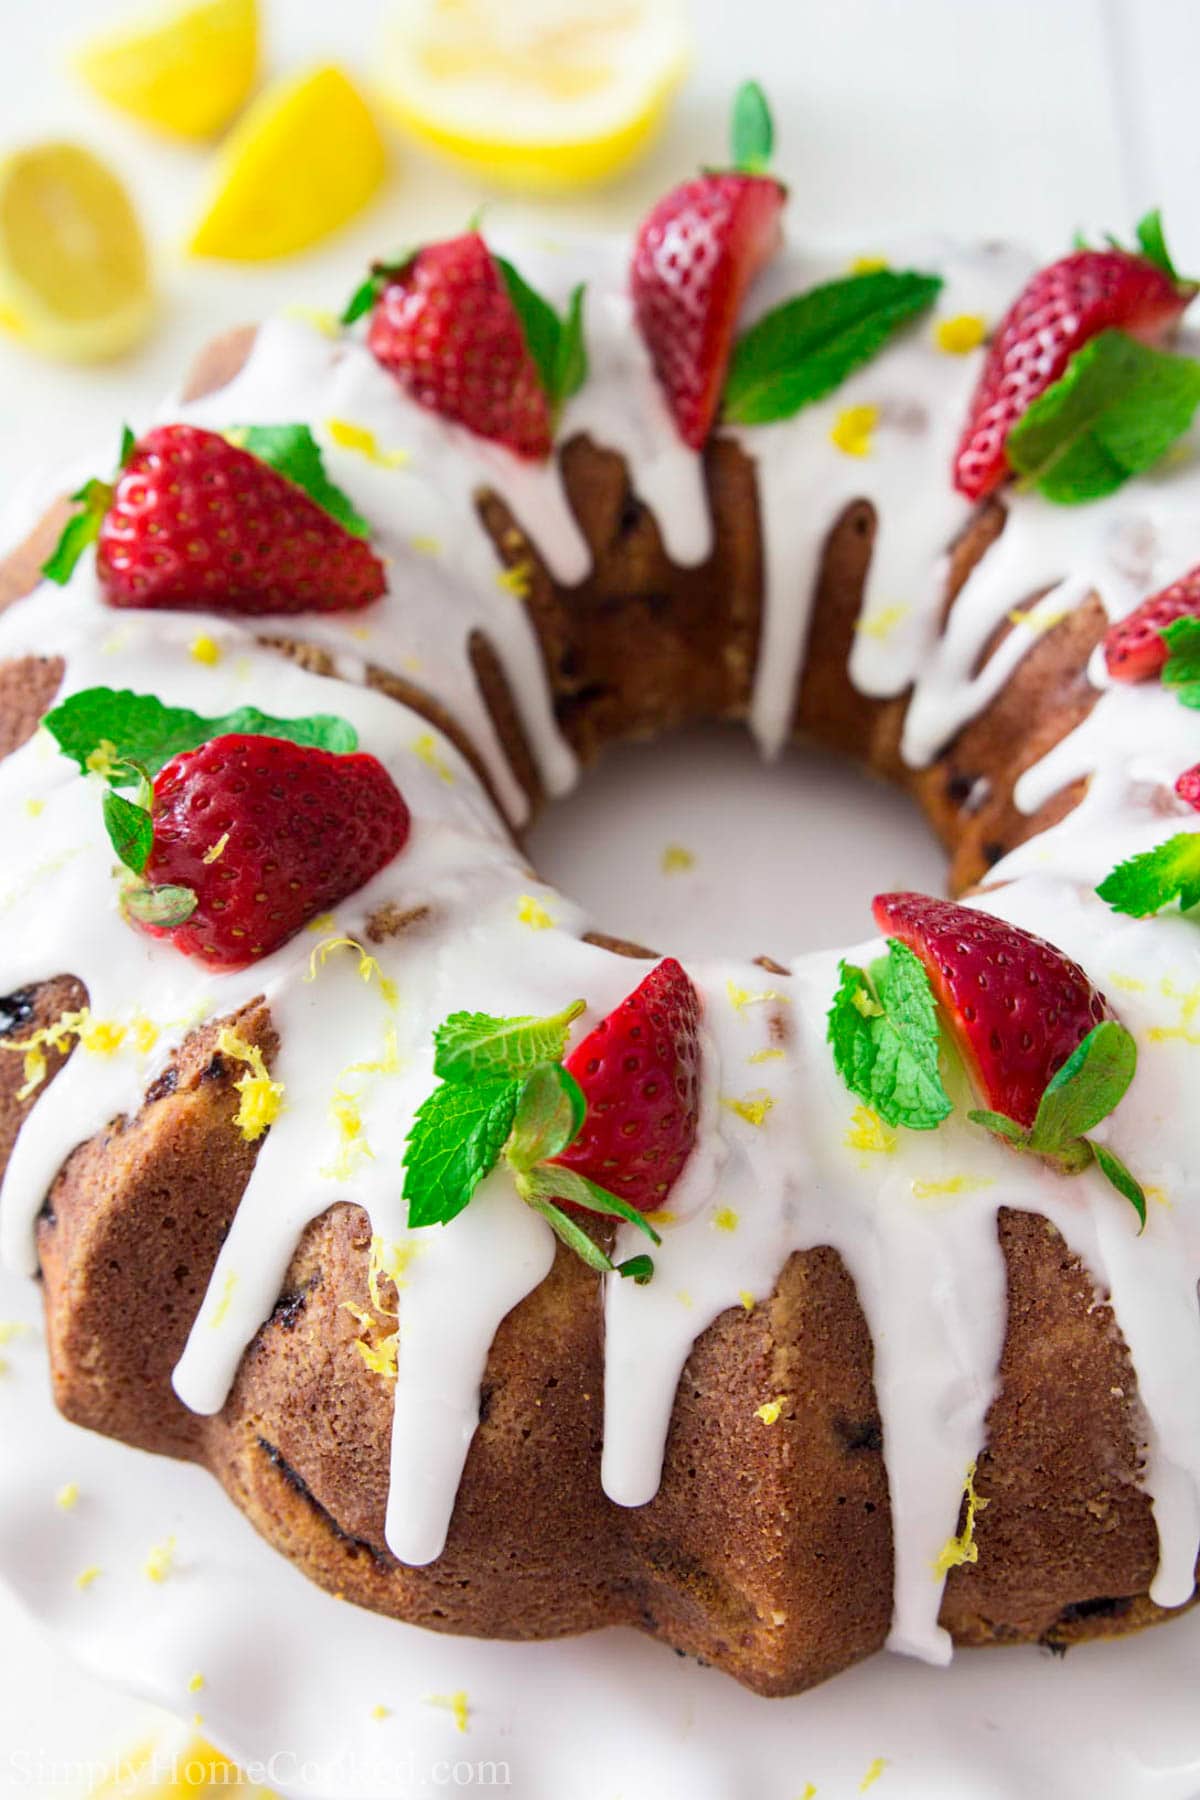 Strawberry Bundt Cake with glaze and strawberries on top with mint leaves and lemons nearby